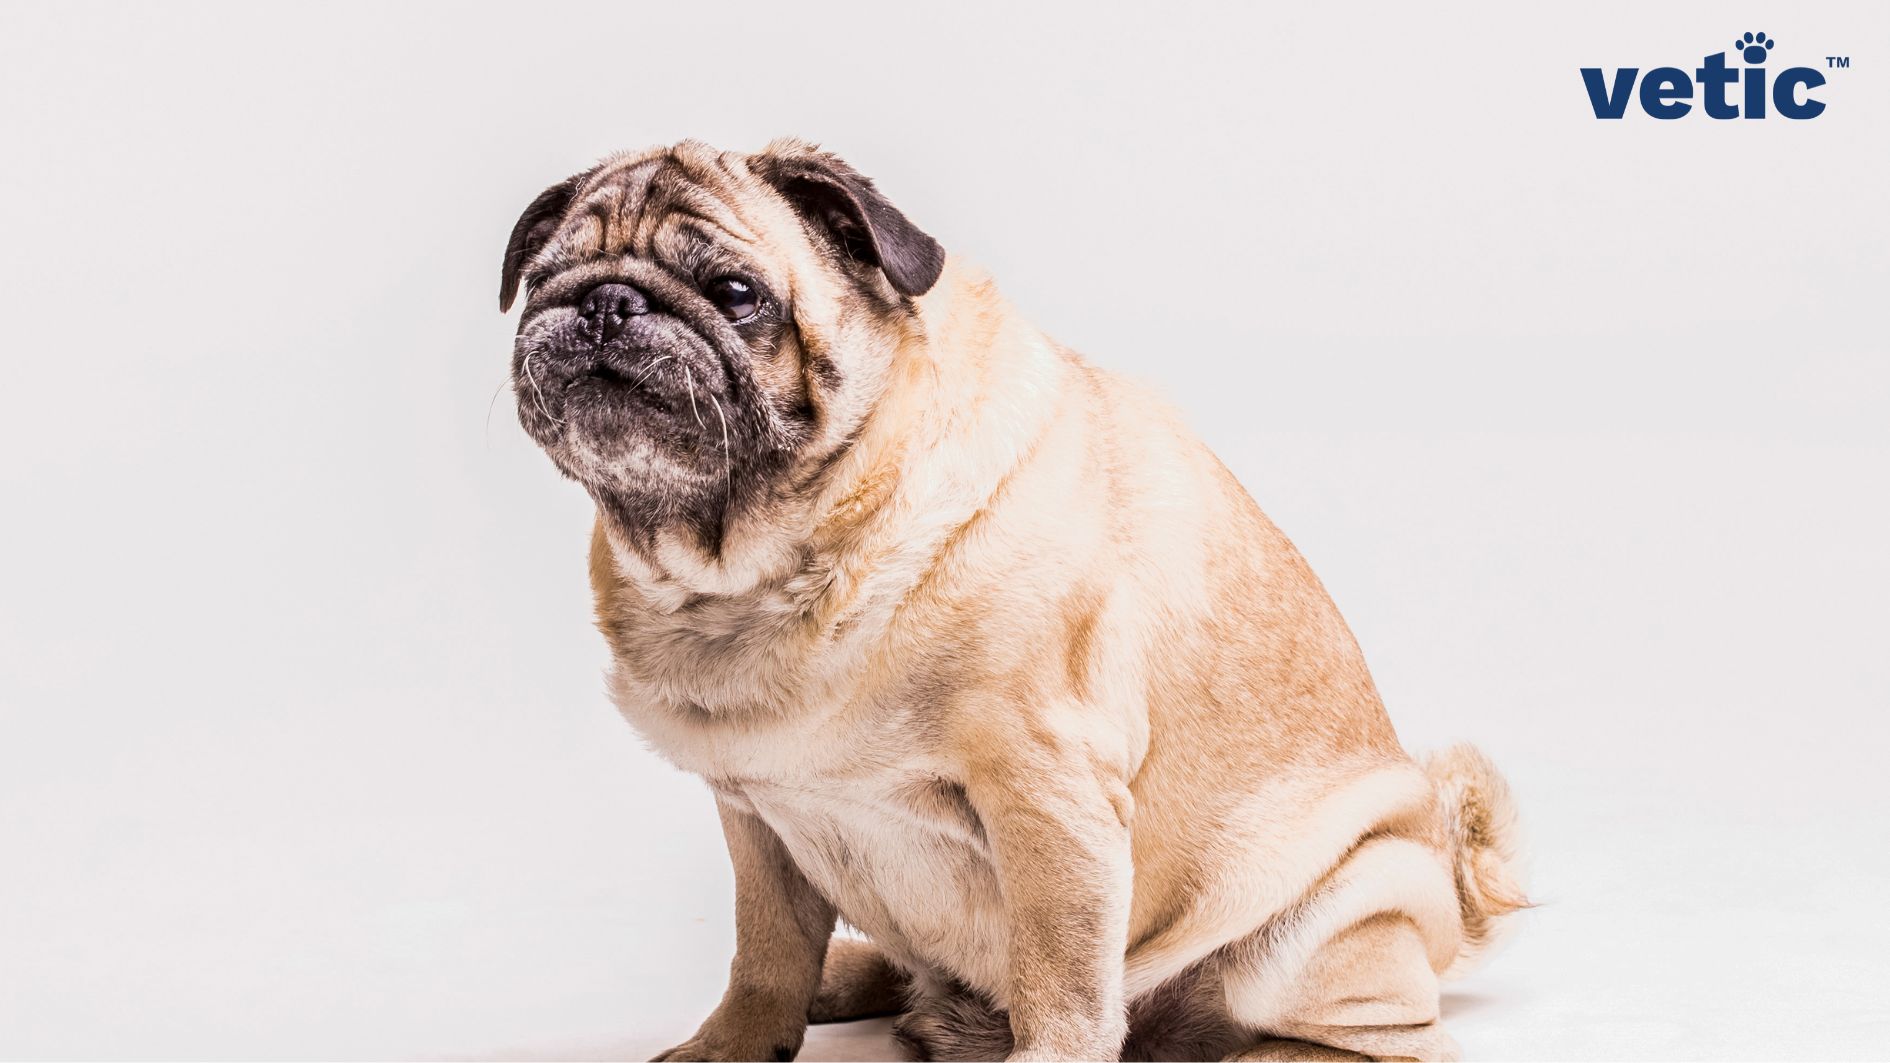 An old, male pug sitting at an angle to the camera. He is overweight and has deformities in the joints of his front legs likely due to arthritis in dogs.